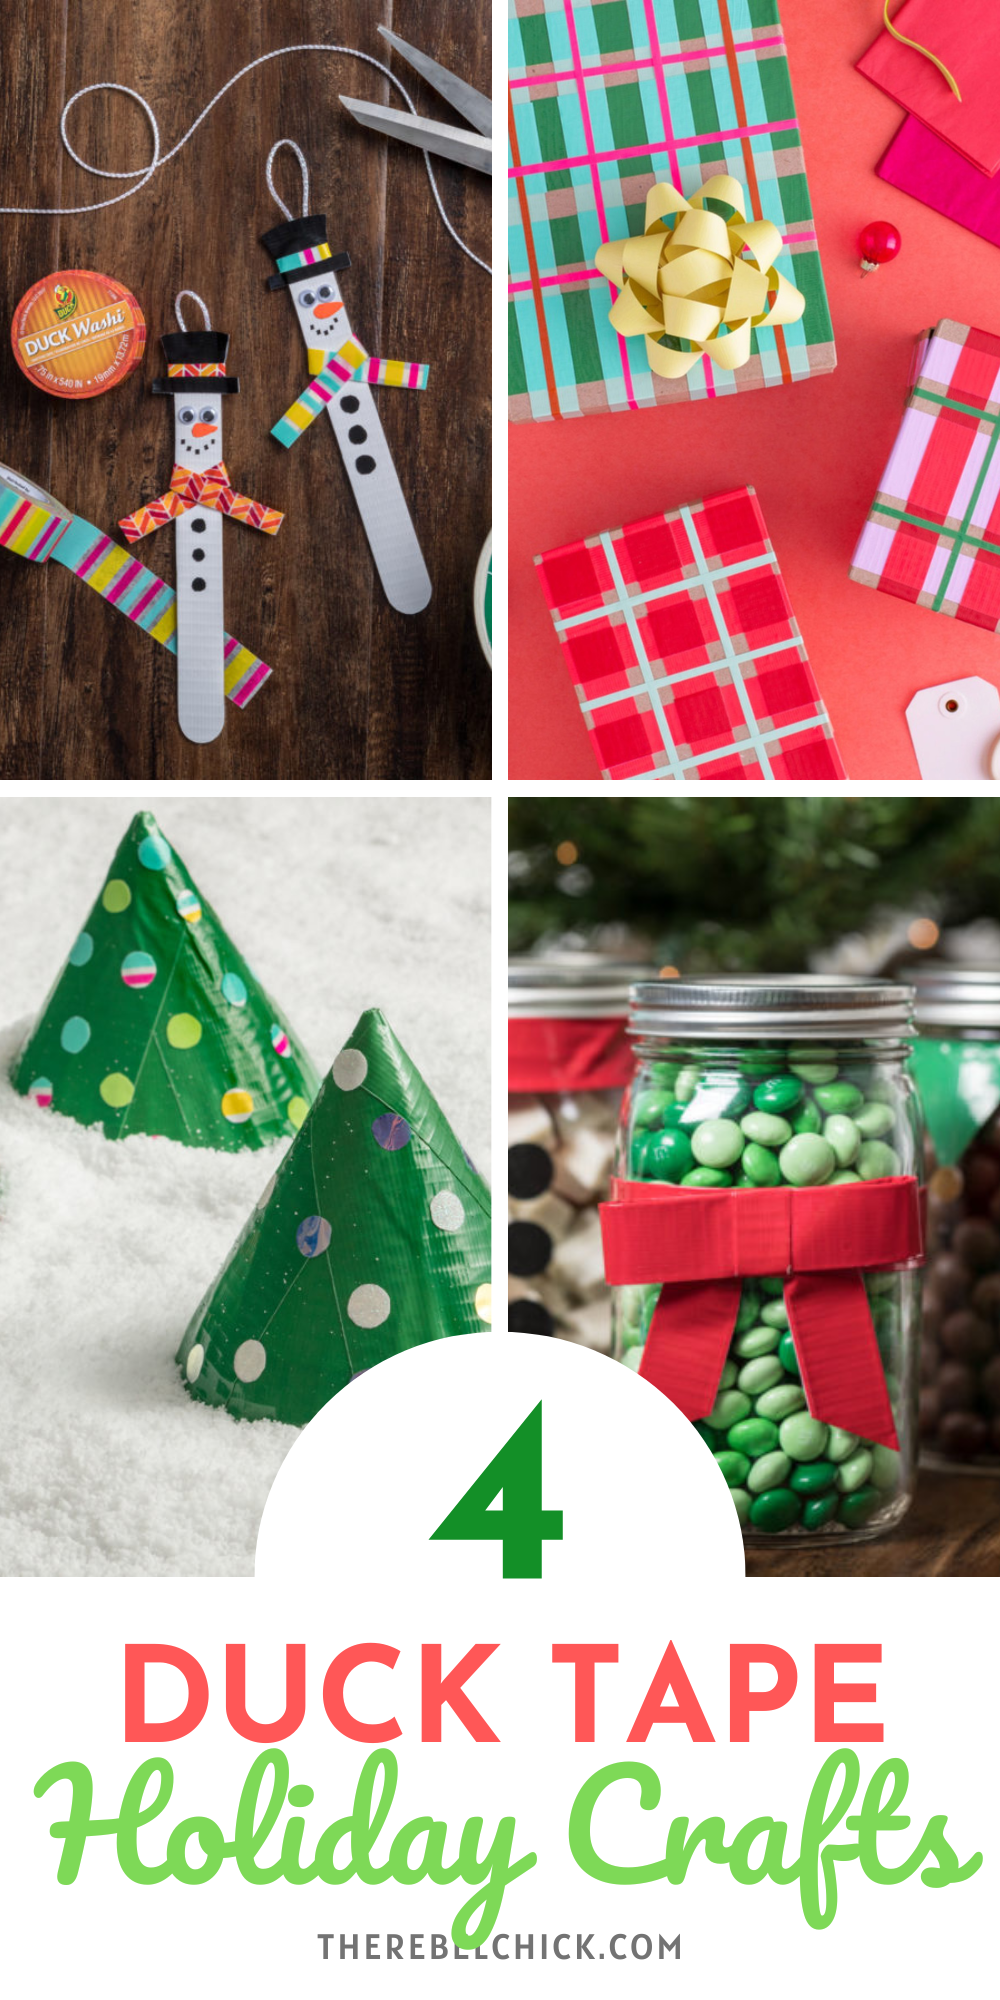 4 Duck Tape Holiday Crafts to Celebrate the Season